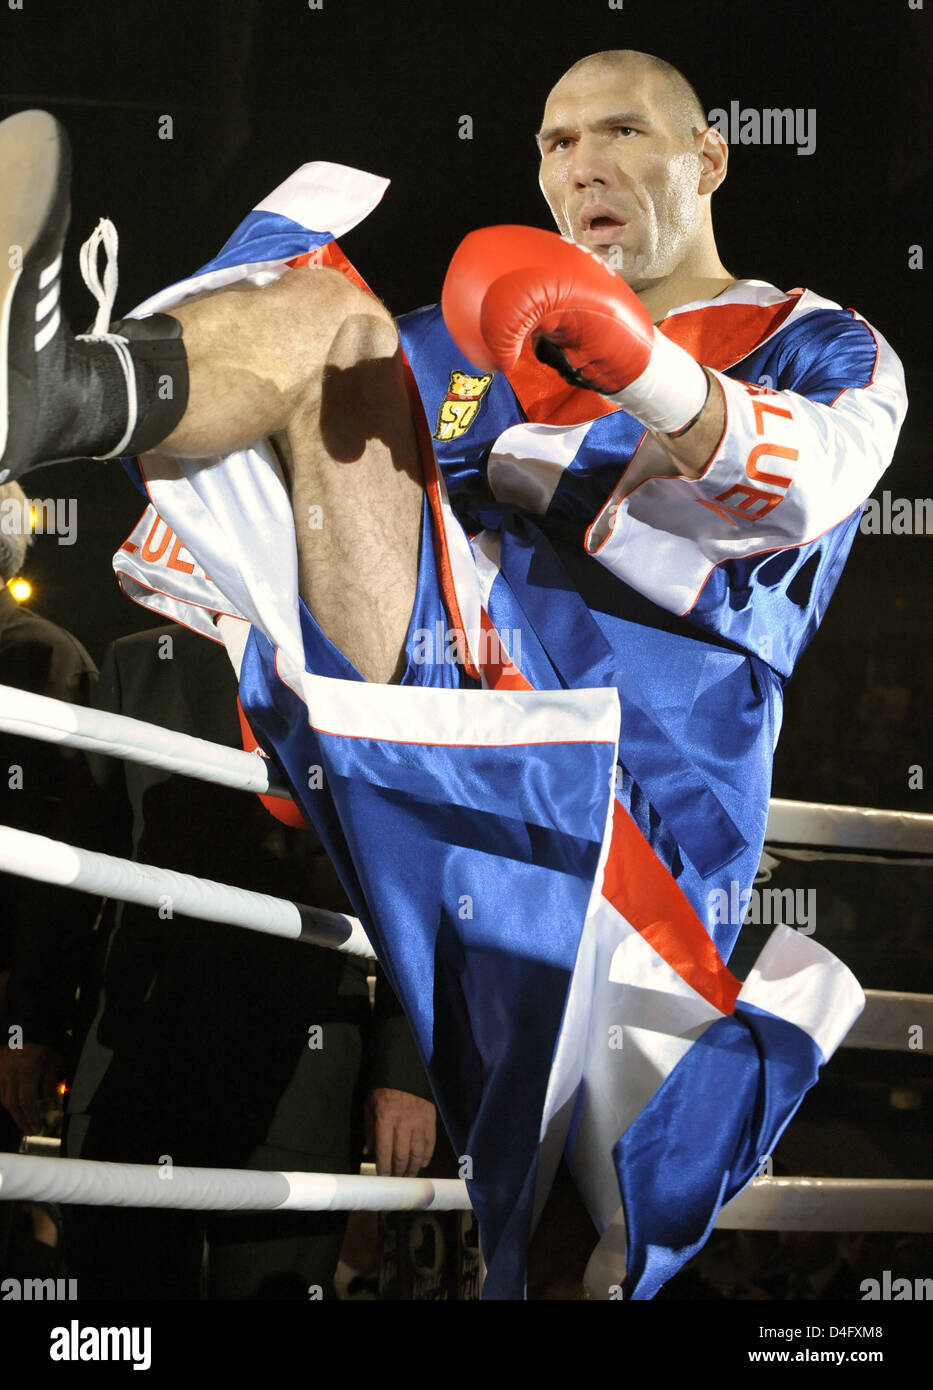 Russian boxer Nikolai Valuev enters the boxing ring for the World Boxing Association (WBA) heavyweight title fight against US John Ruiz in Berlin, Germany, 30 August 2008. Valuev, who had lost the title in April 2007, won the fight in a split decision. Photo: Soeren Stache Stock Photo